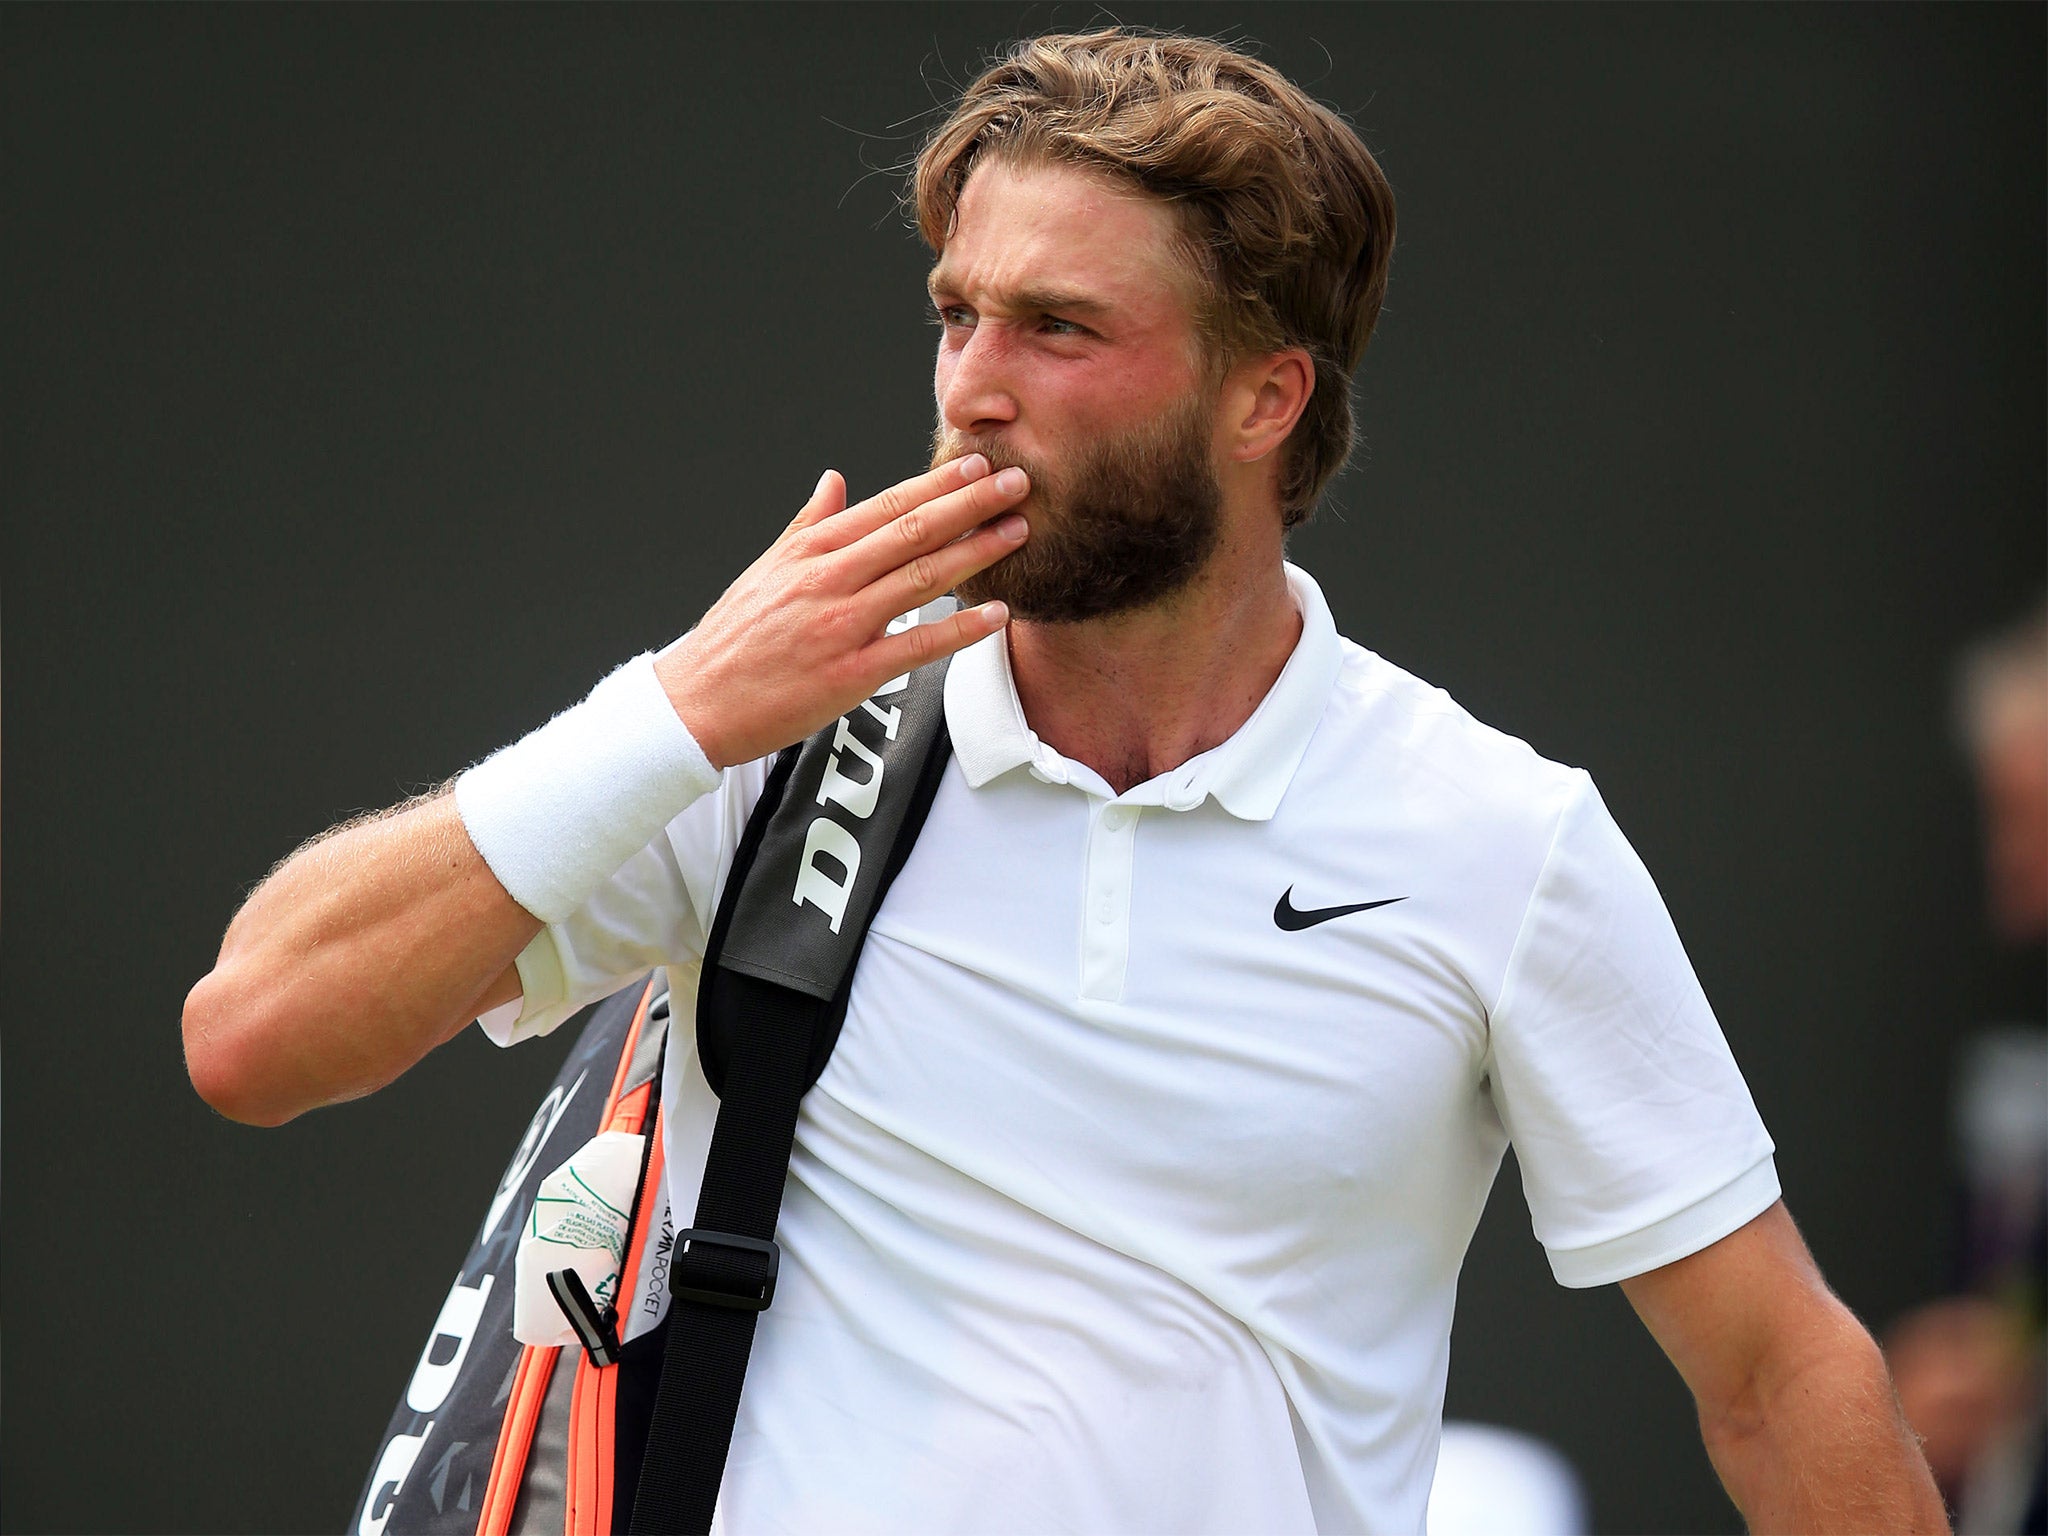 Liam Broady blows kisses to the crowd after his defeat